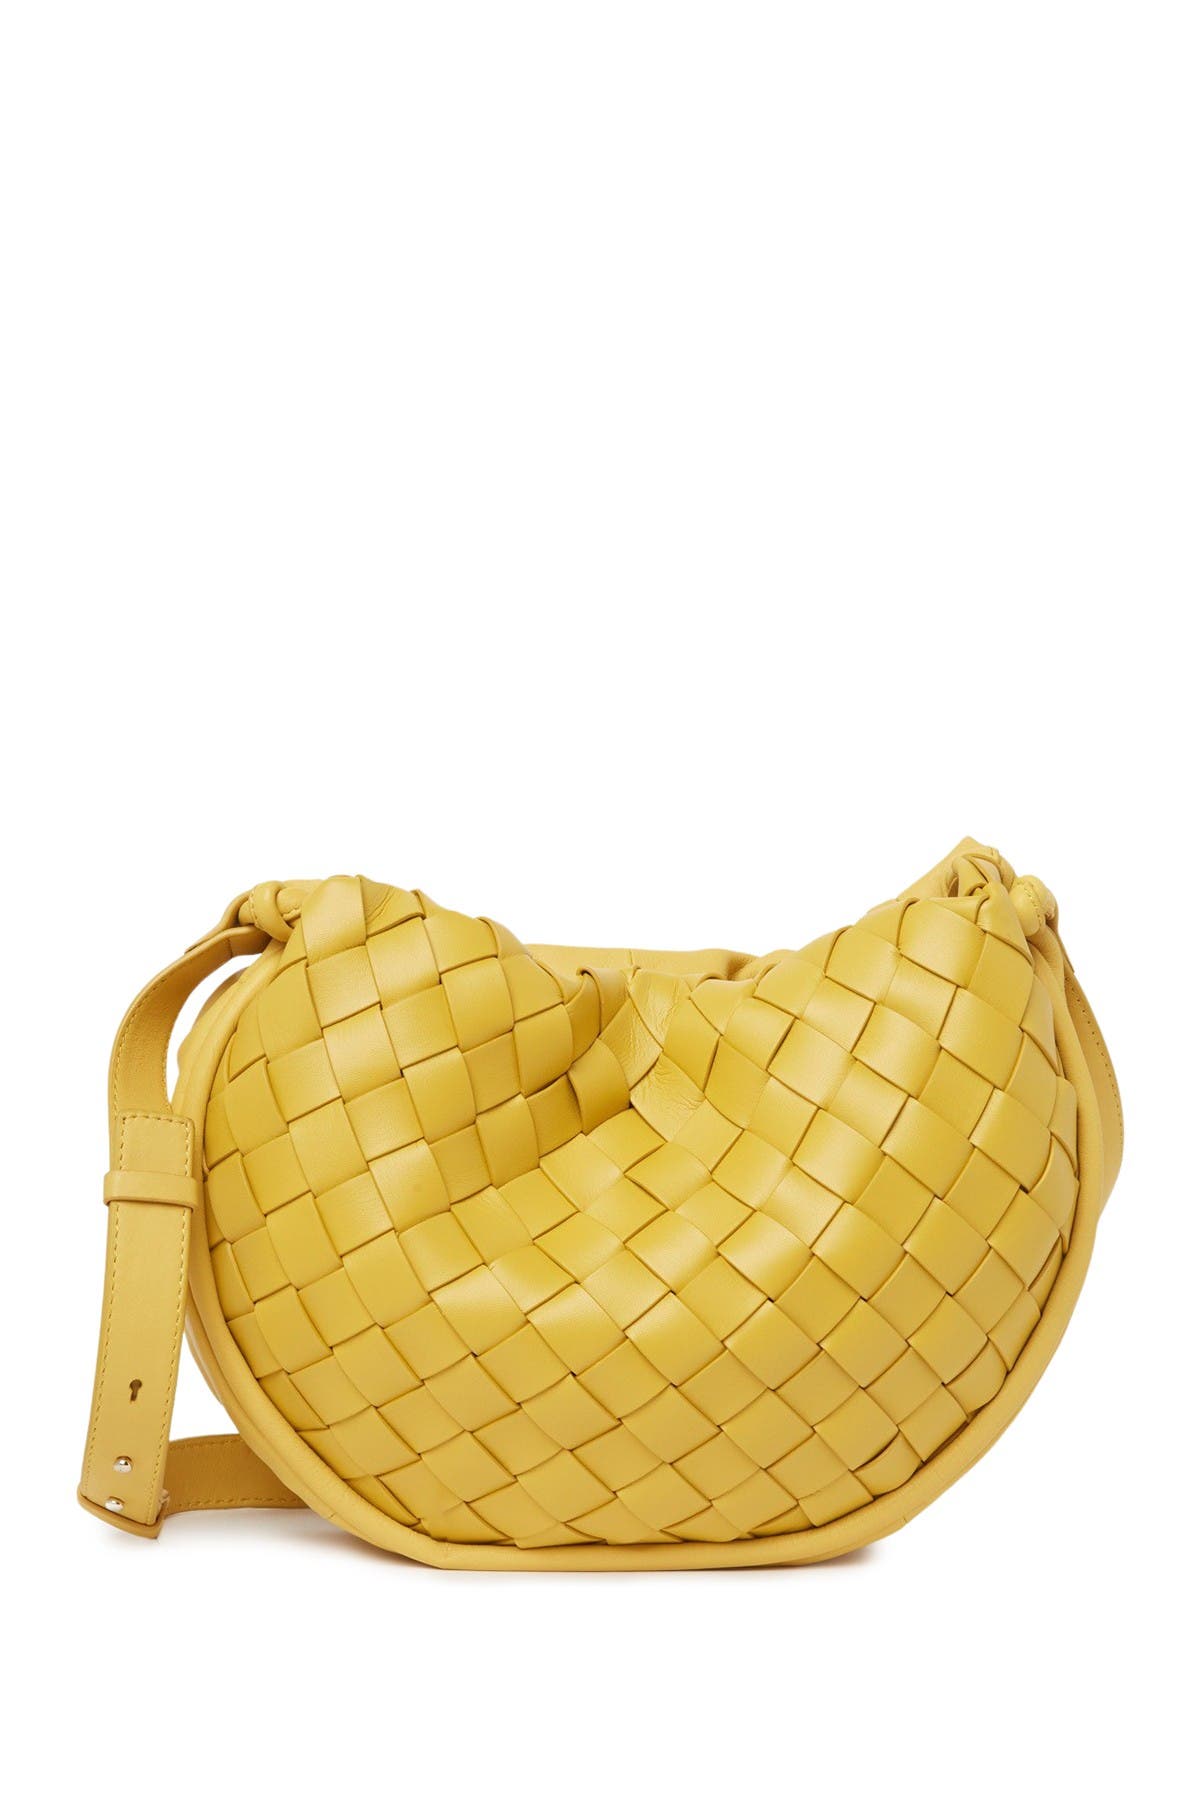 Vince Camuto Jude Leather Crossbody Bag In Yellow 01